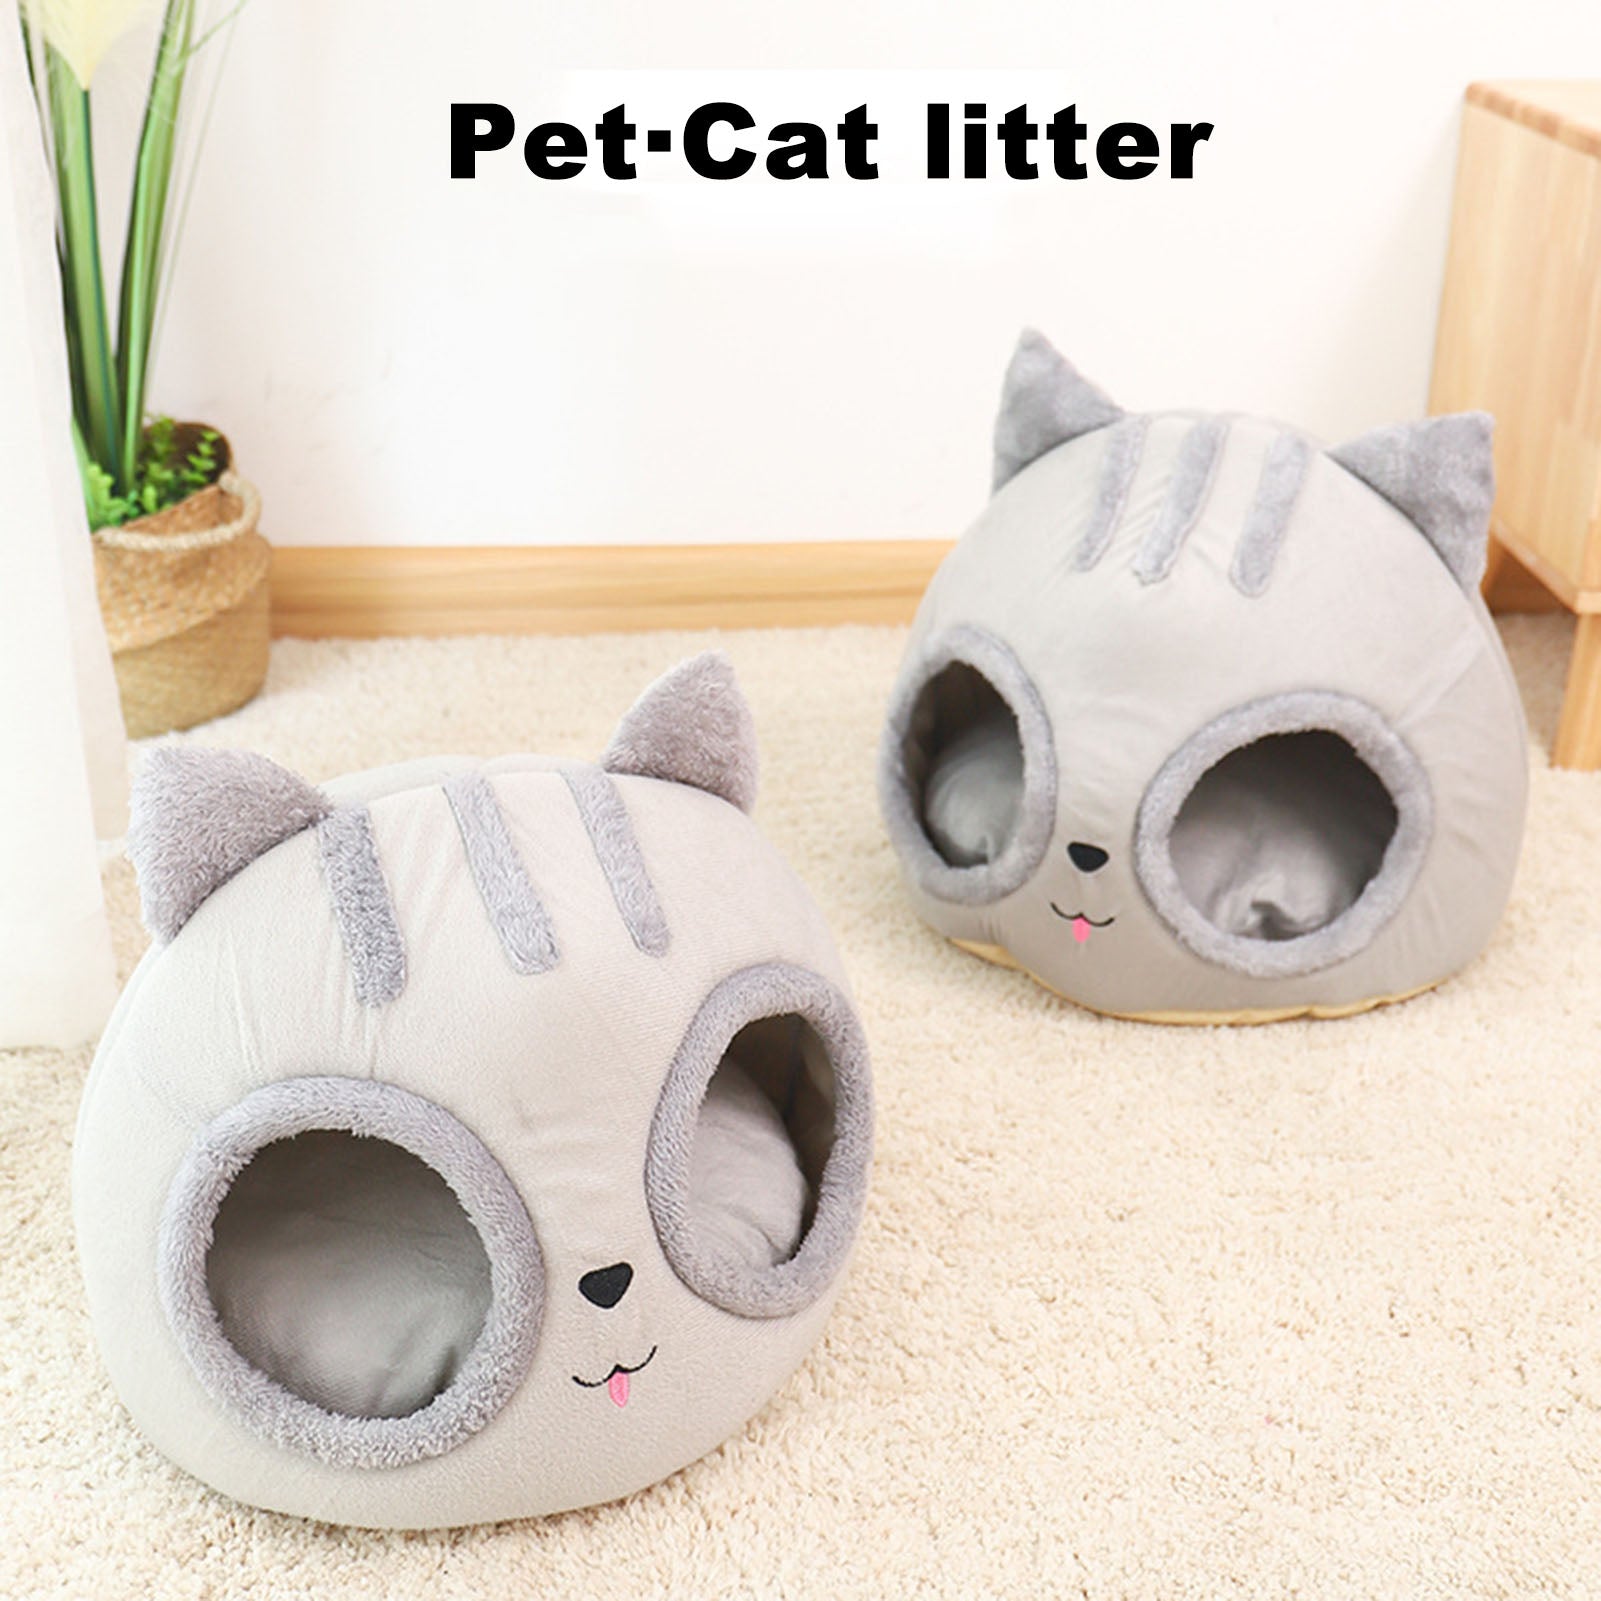 Sijiali Kitty Bed House Semi-Closed Detachable Comfortable Kitty Shaped Cat Nest for Pet